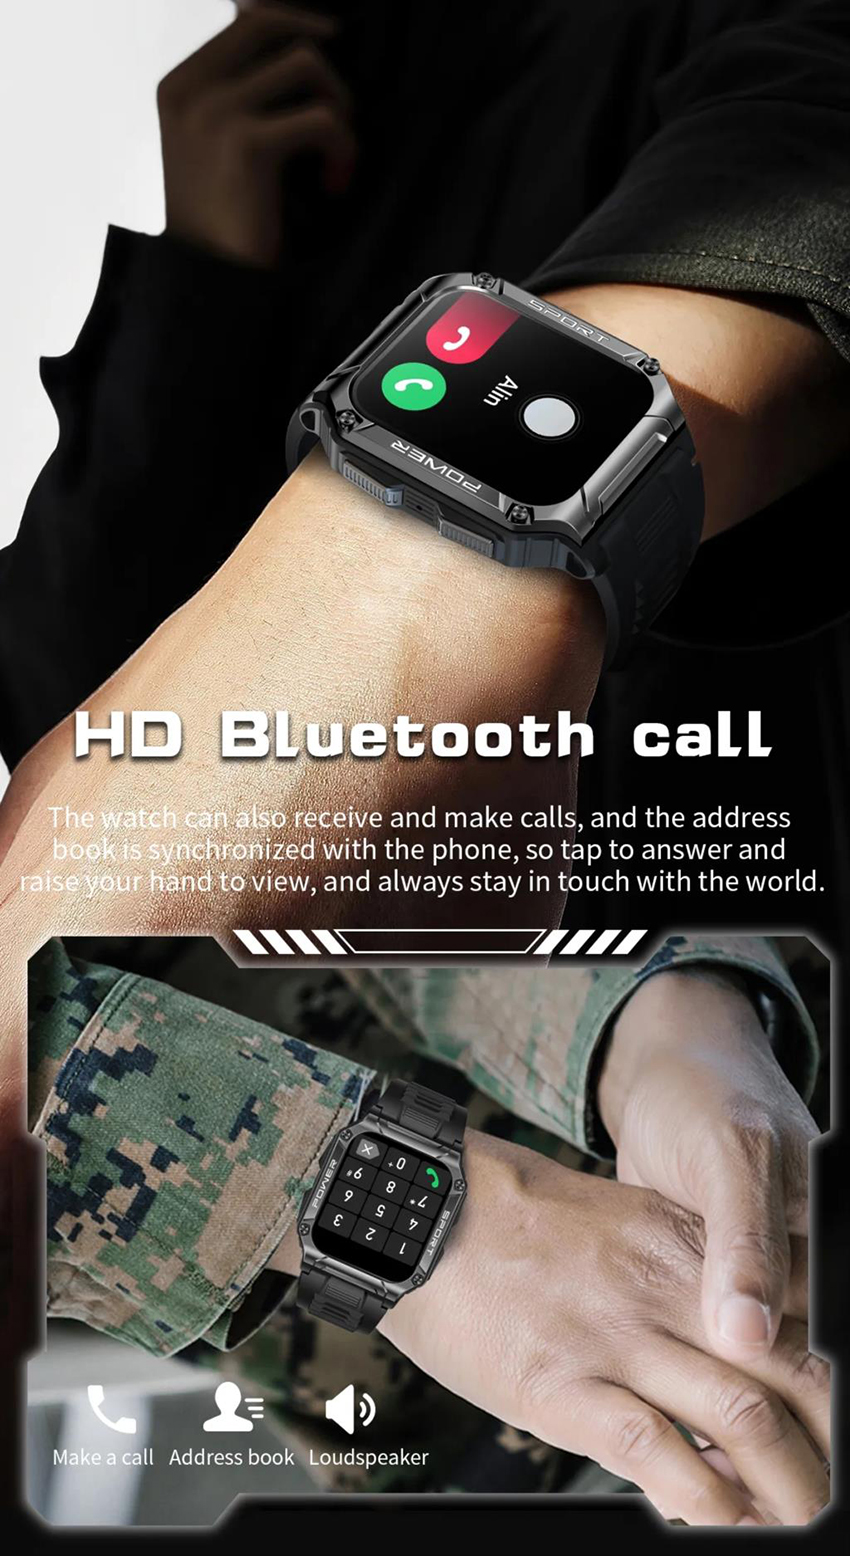 NX6 Military Outdoor Smart Watch With Compass Bluetooth Call Heart Rate Blood Oxygen Waterproof Sport Smartwatch For Men